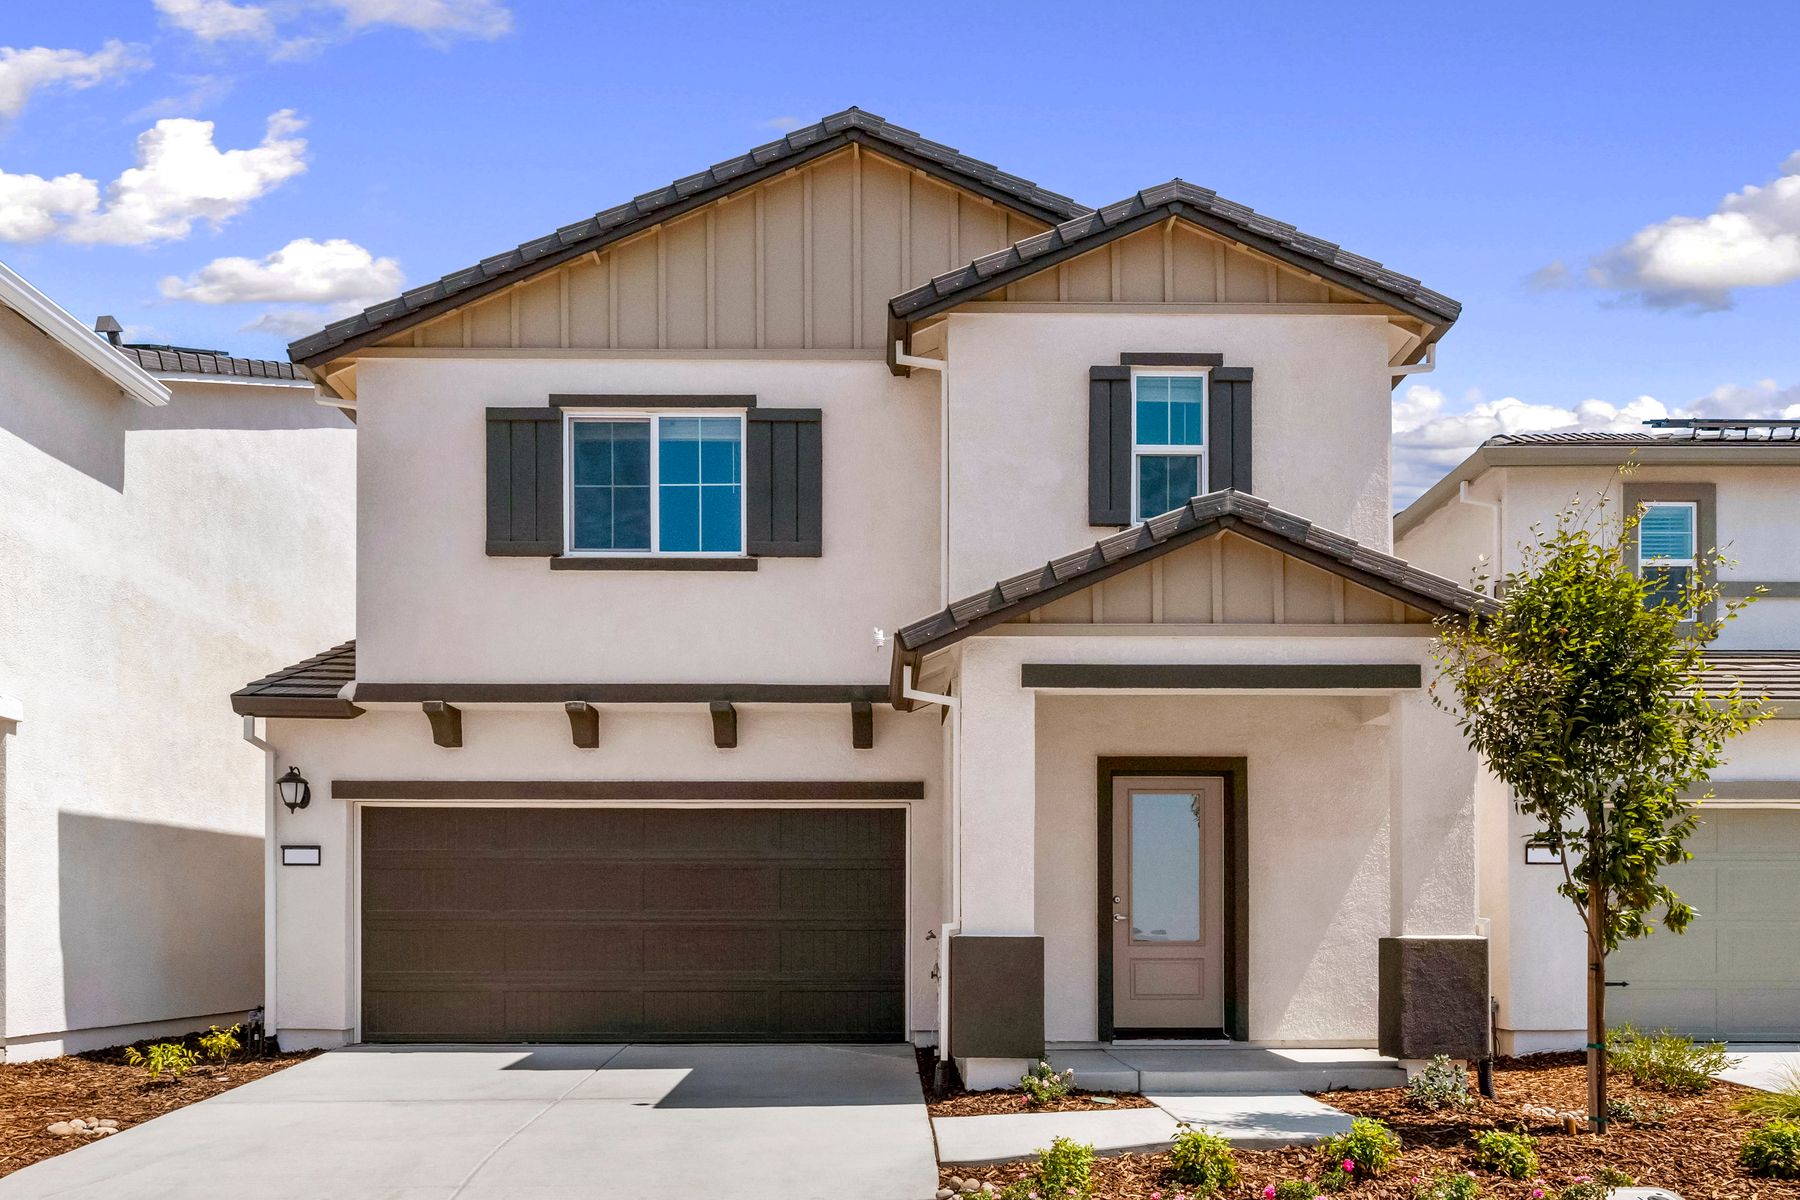 The Shelby by LGI Homes:The Shelby is a beautiful home with stucco.,